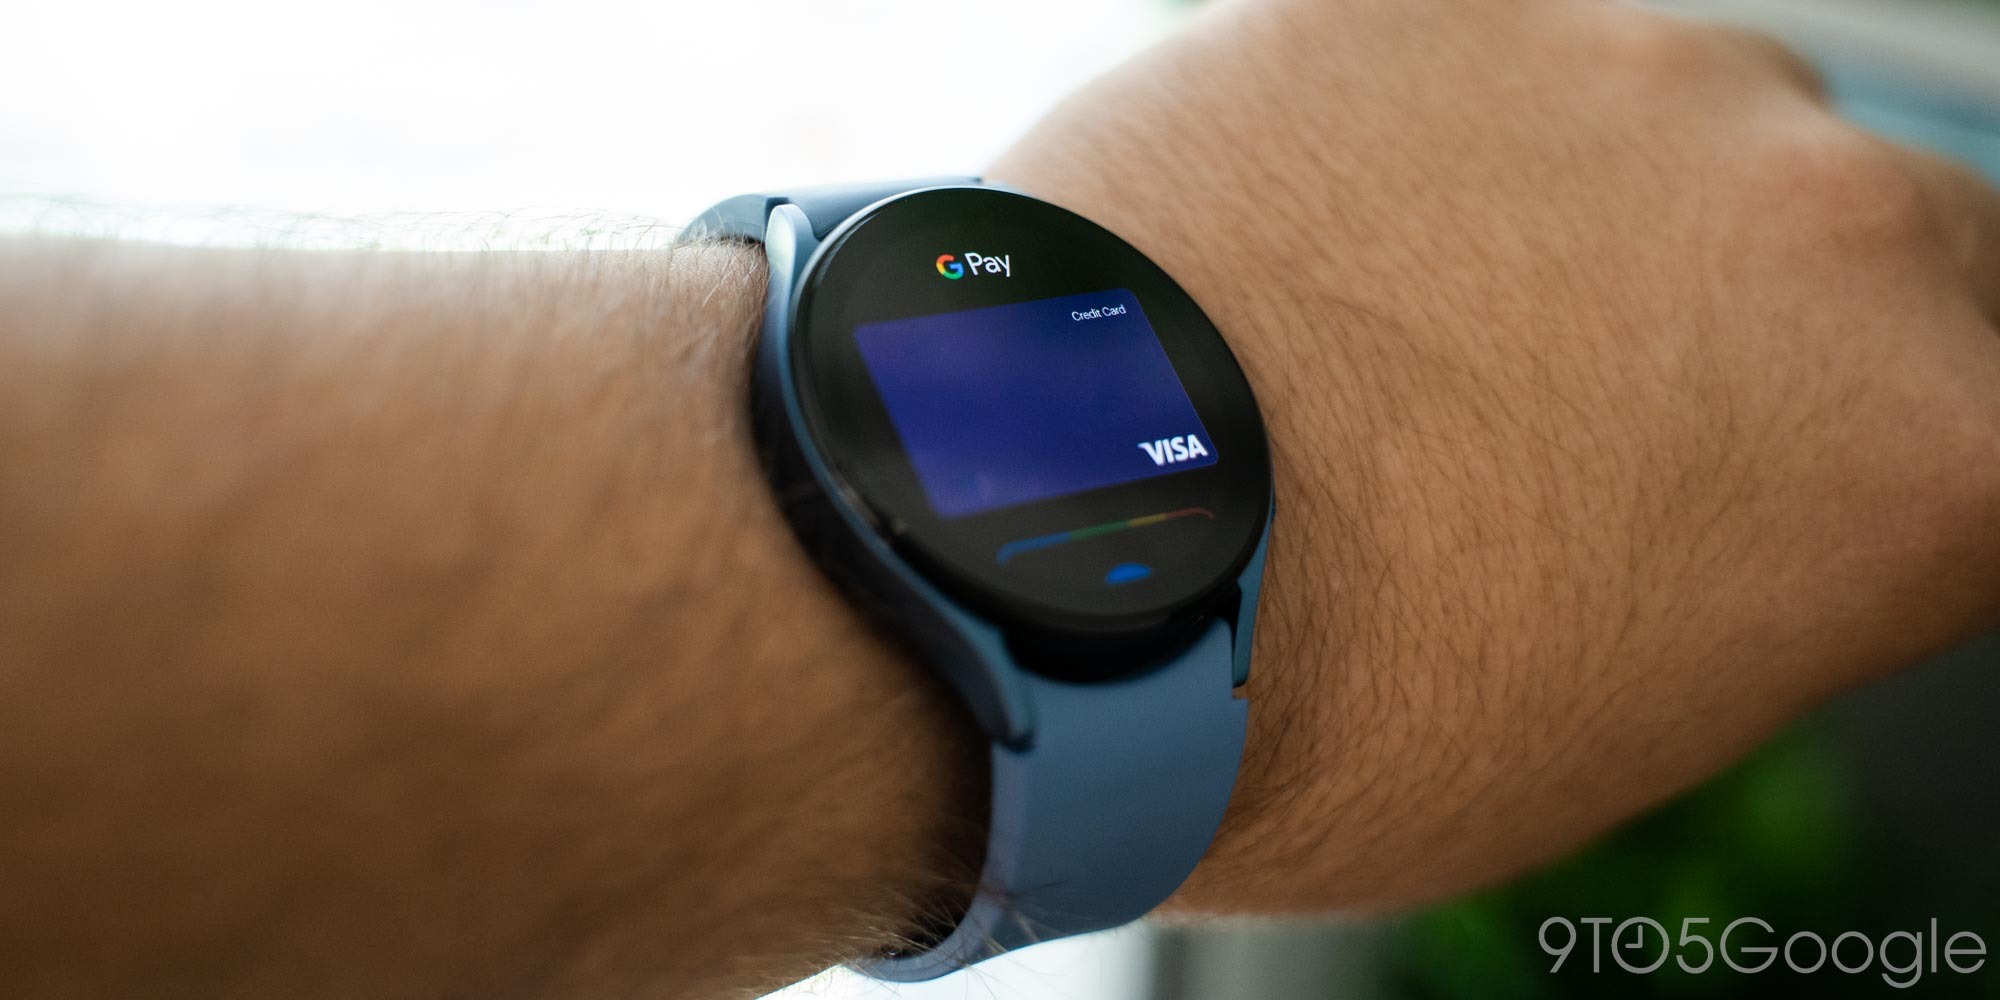 en anden Fader fage brysomme Which watches can use Google Wallet? Here's our list